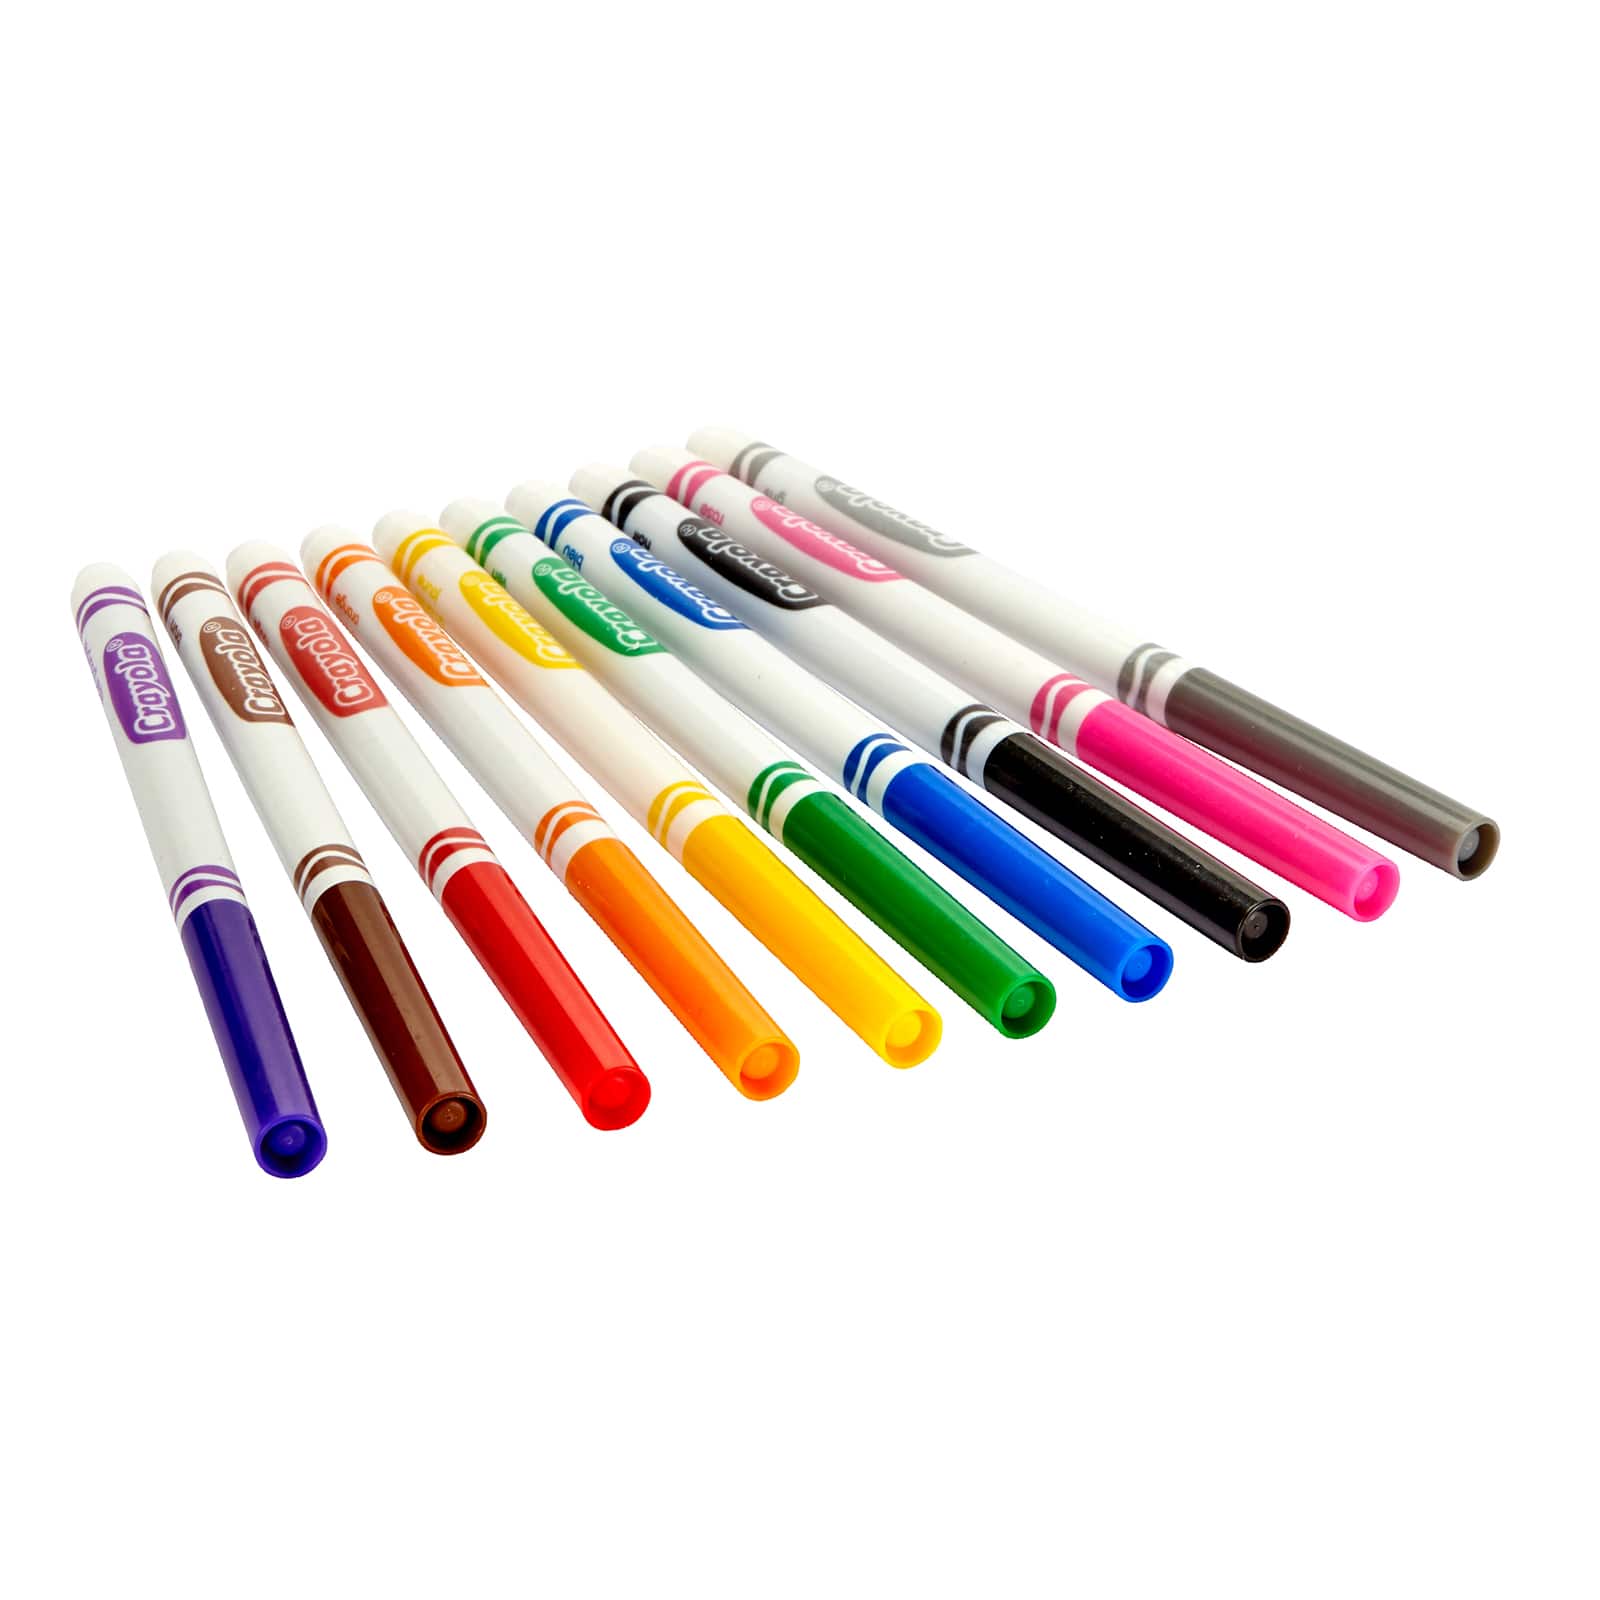 Crayola® Classic Colours Markers - Fine tip,12 Colours 561449